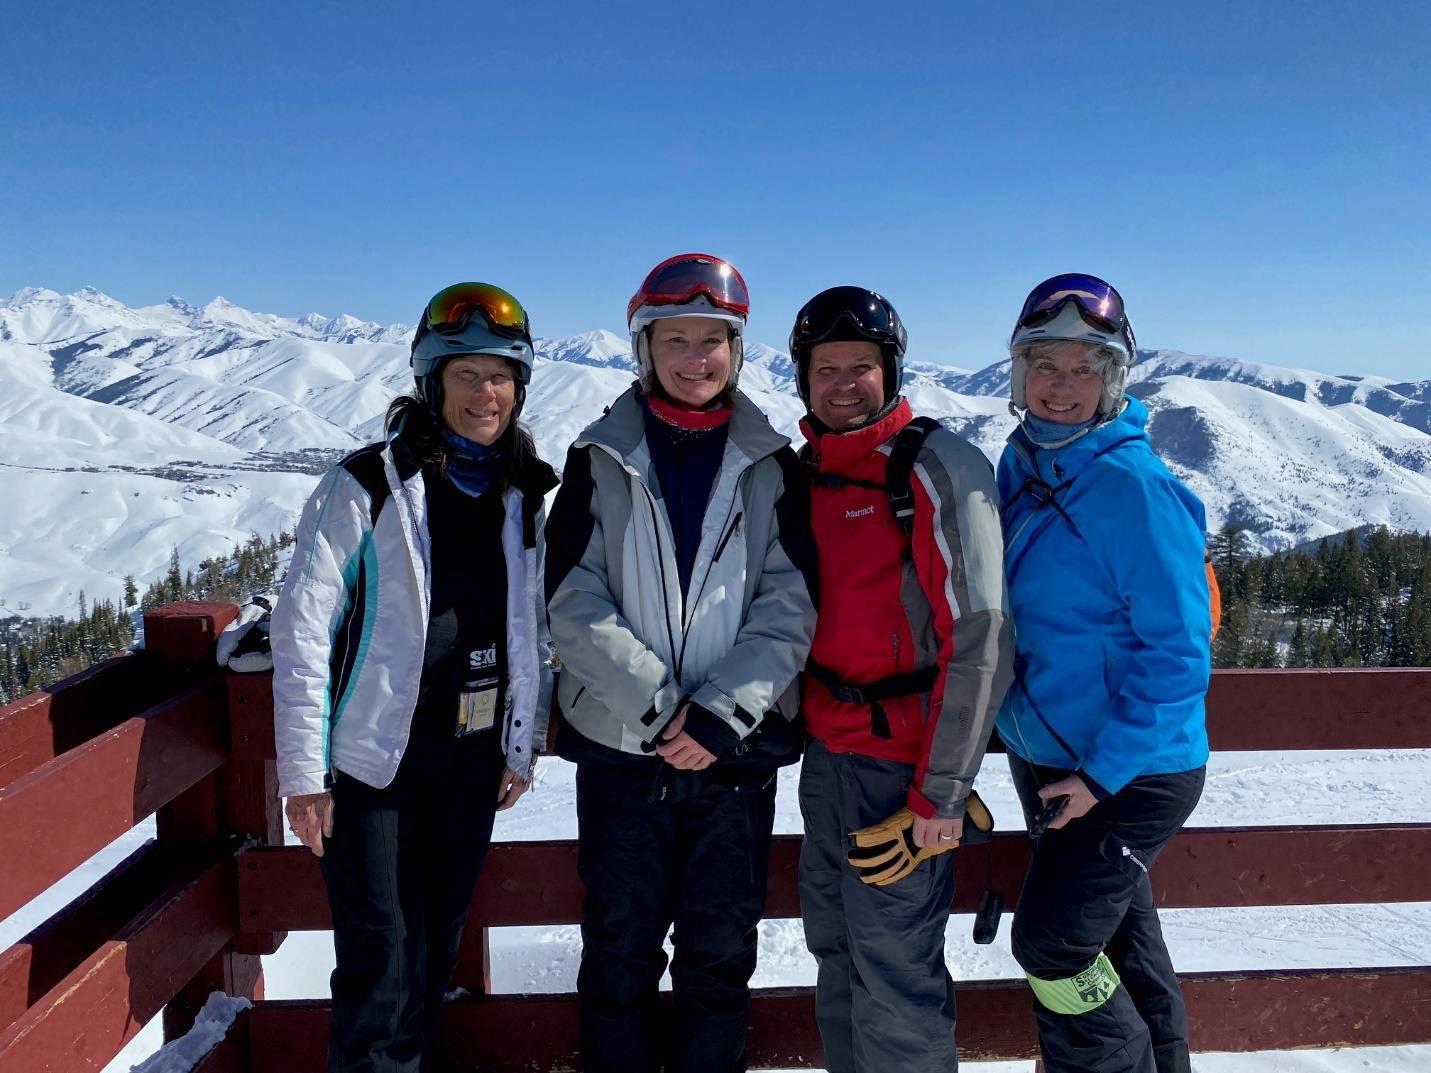 Group of skiers overlooking mountains at Sun Valley